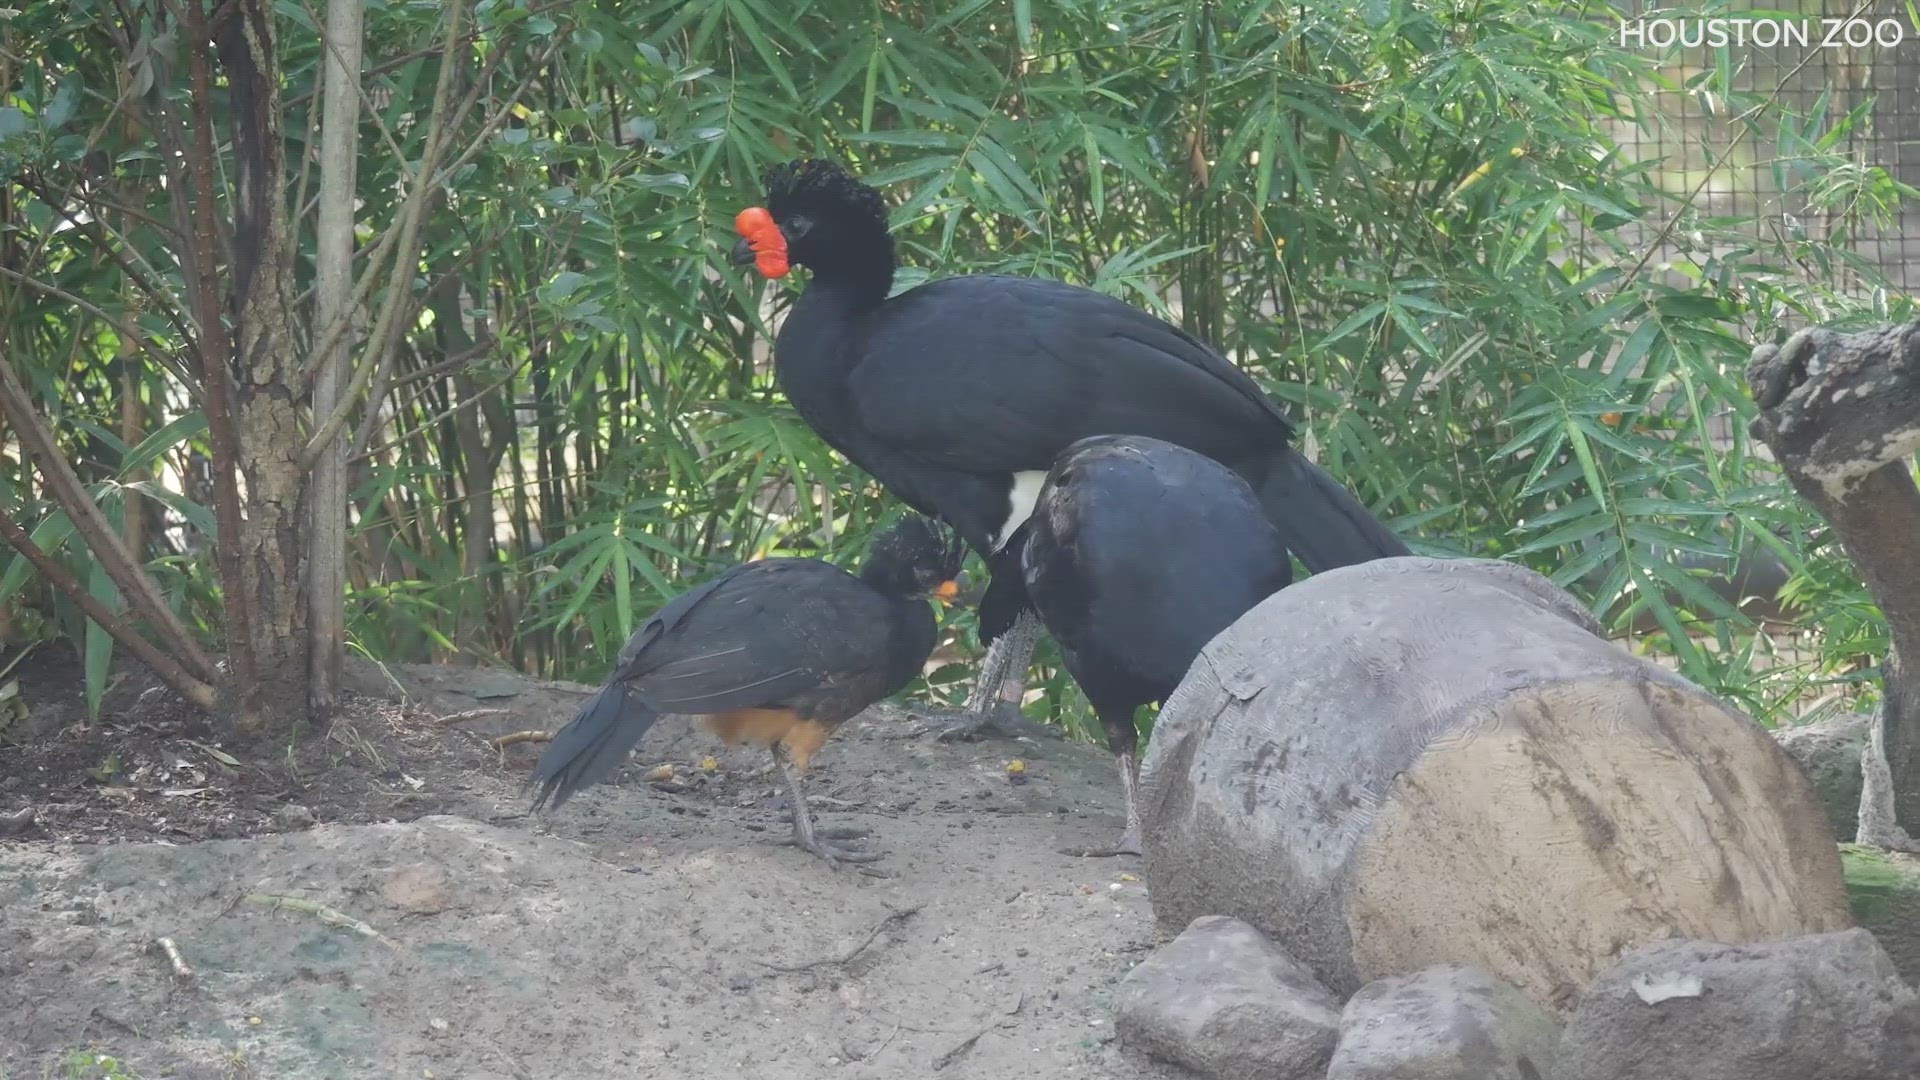 For the first time in 30 years, the endangered curassow chick will be raised by parents at the Houston Zoo.